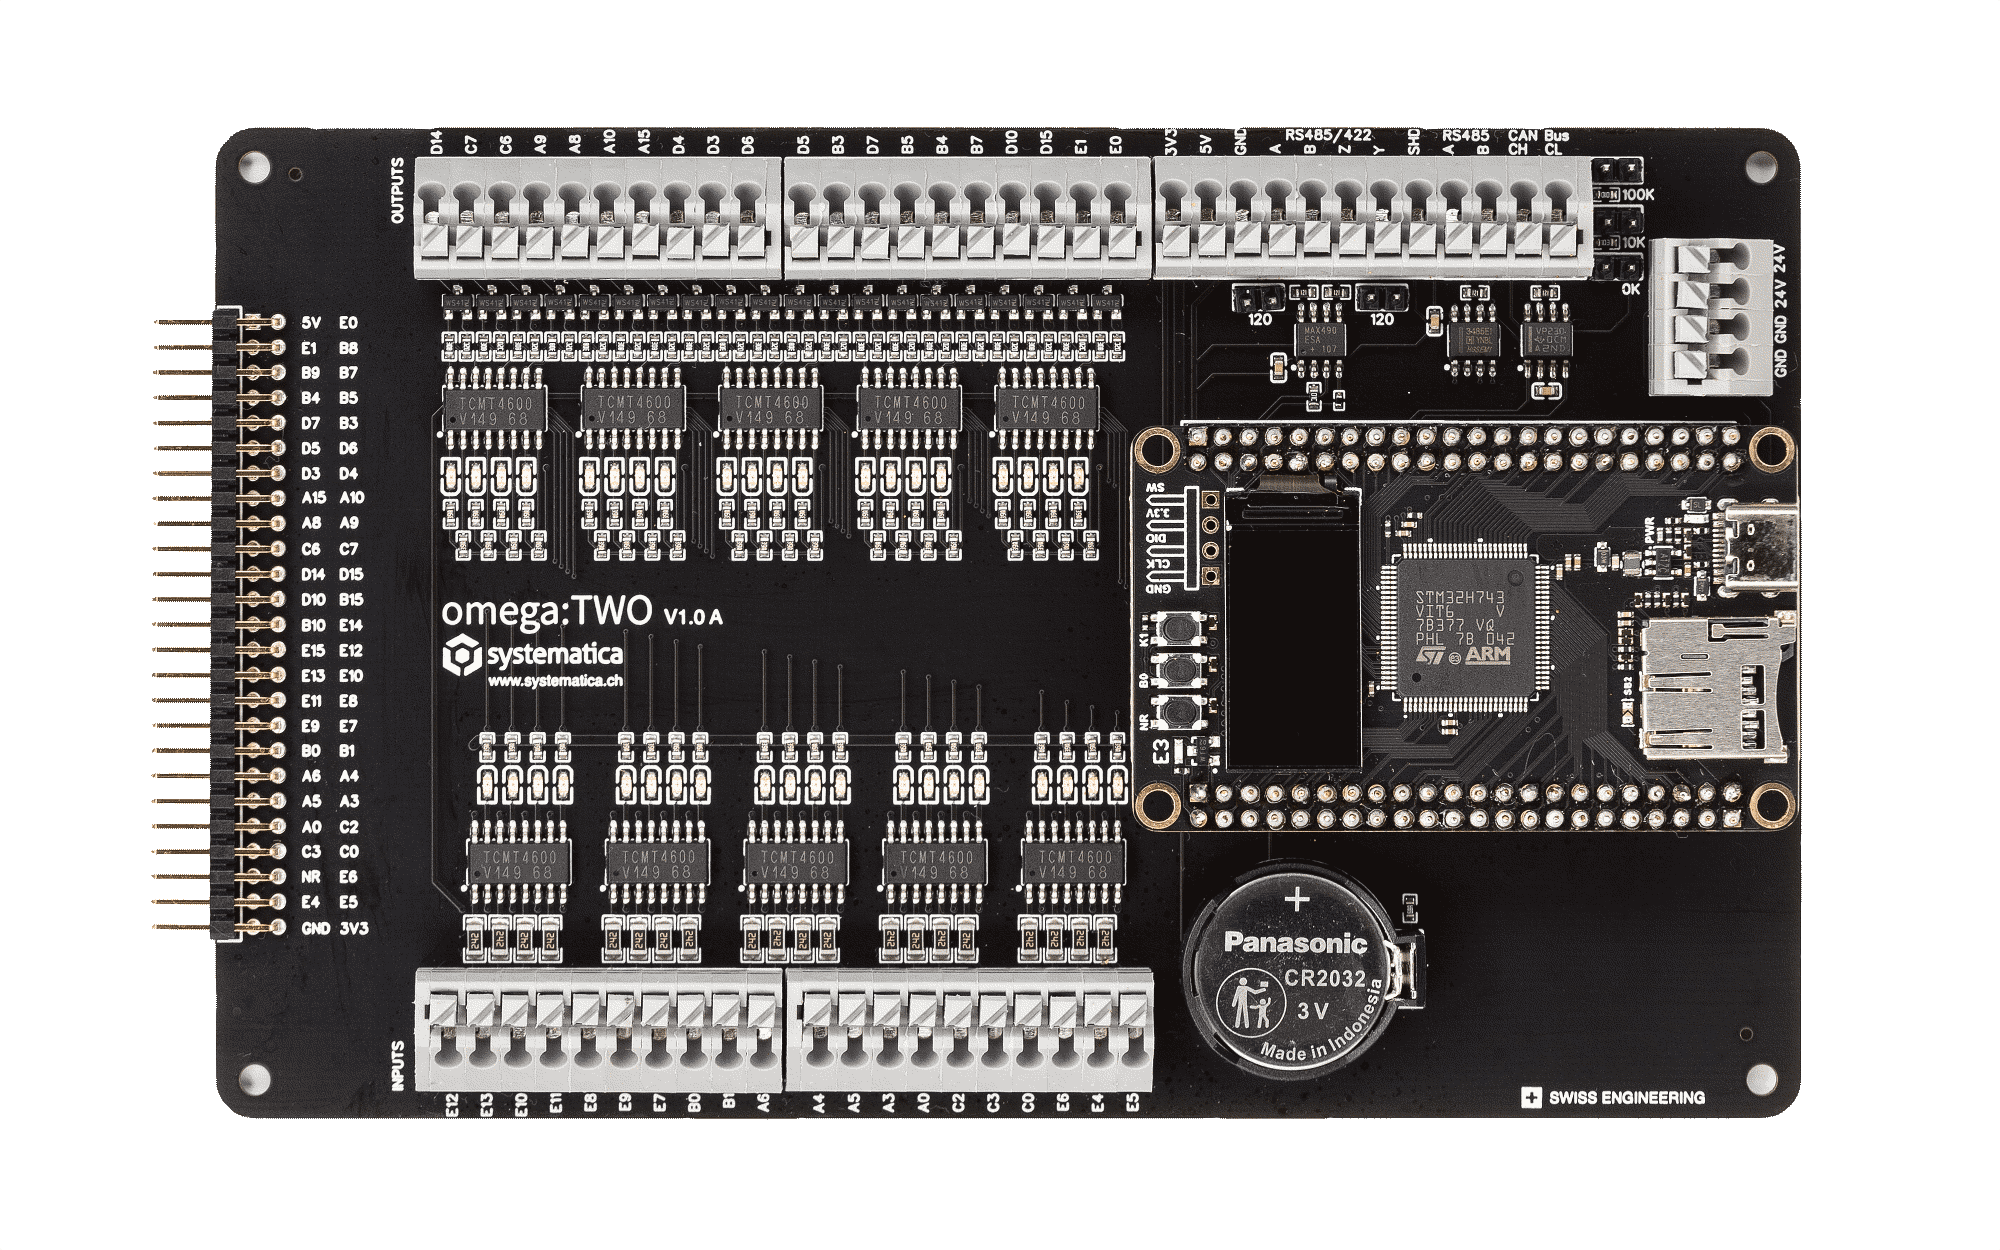 omega:TWO MicroPython programmable industrial board